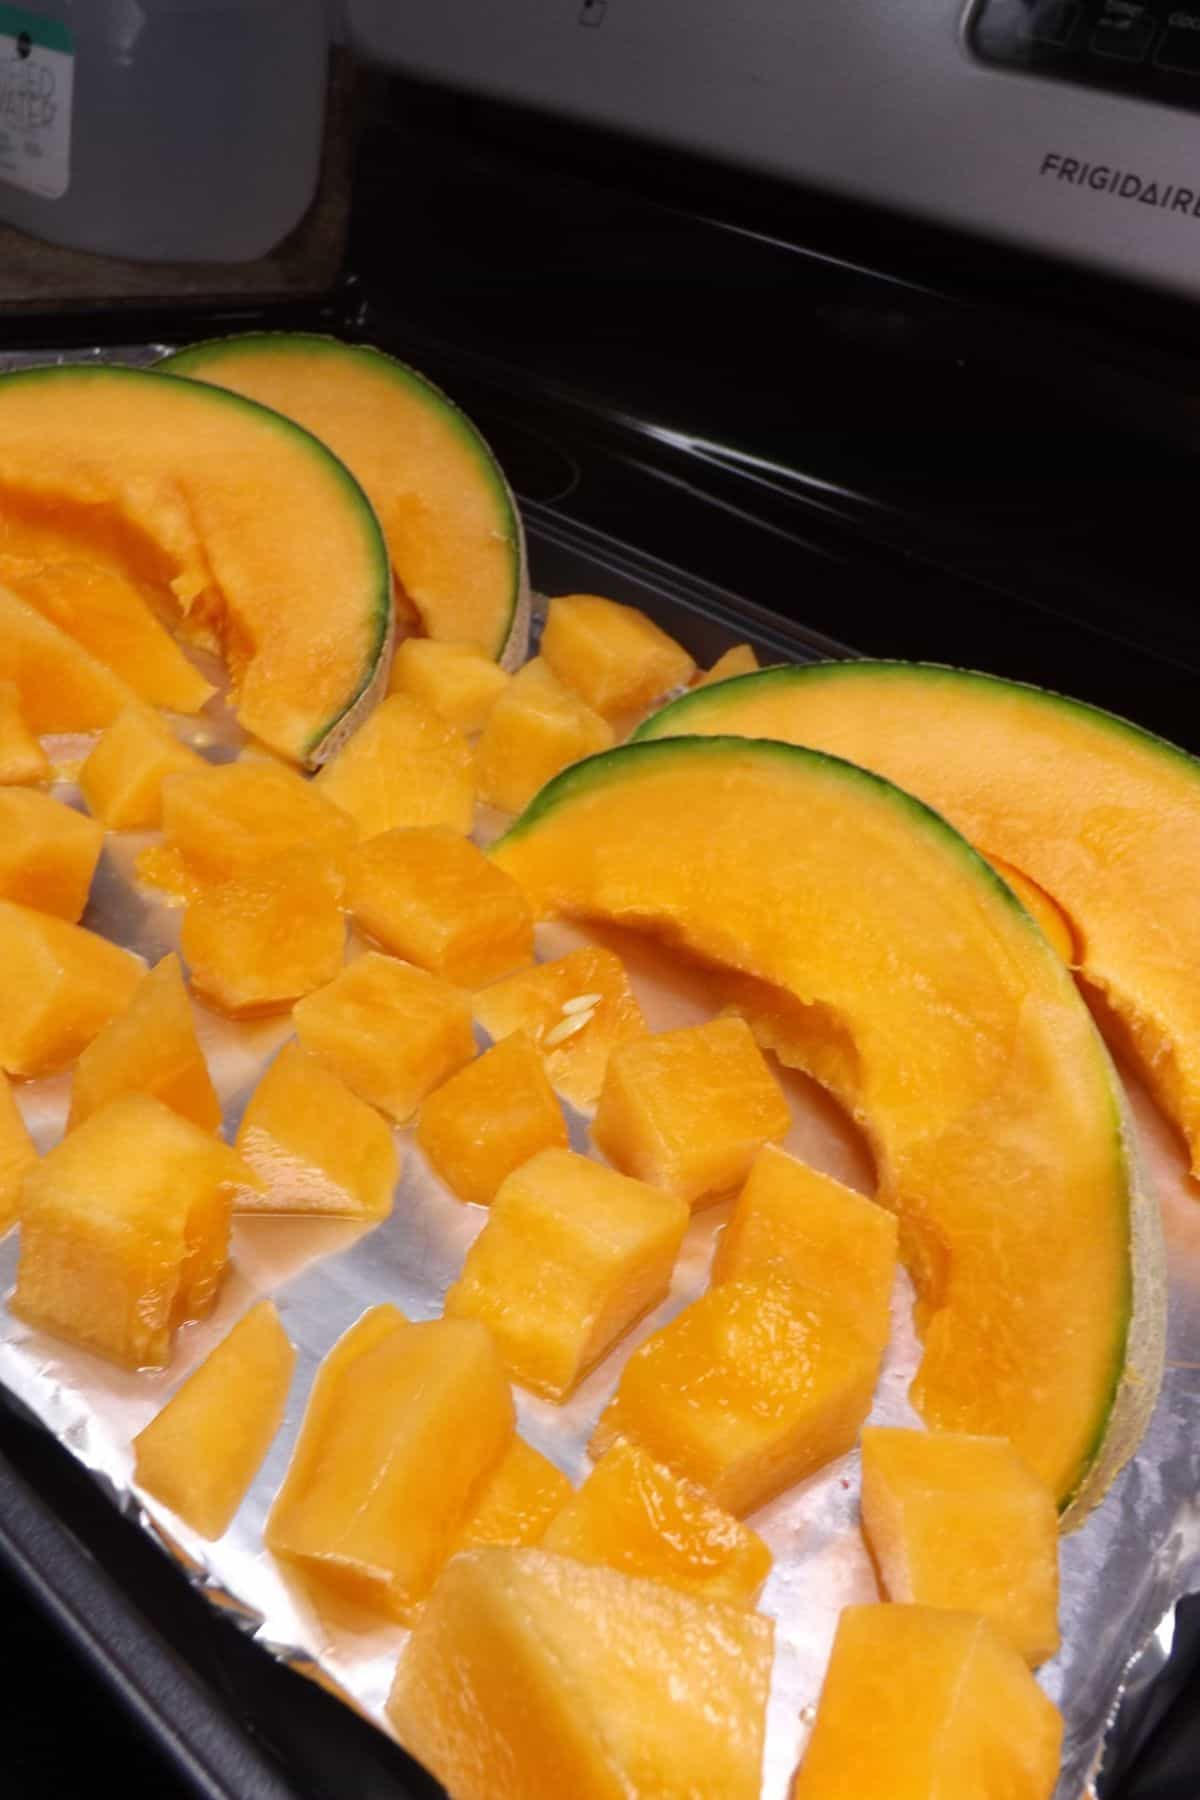 Slices and chunks of cantaloupe on a cookie sheet.